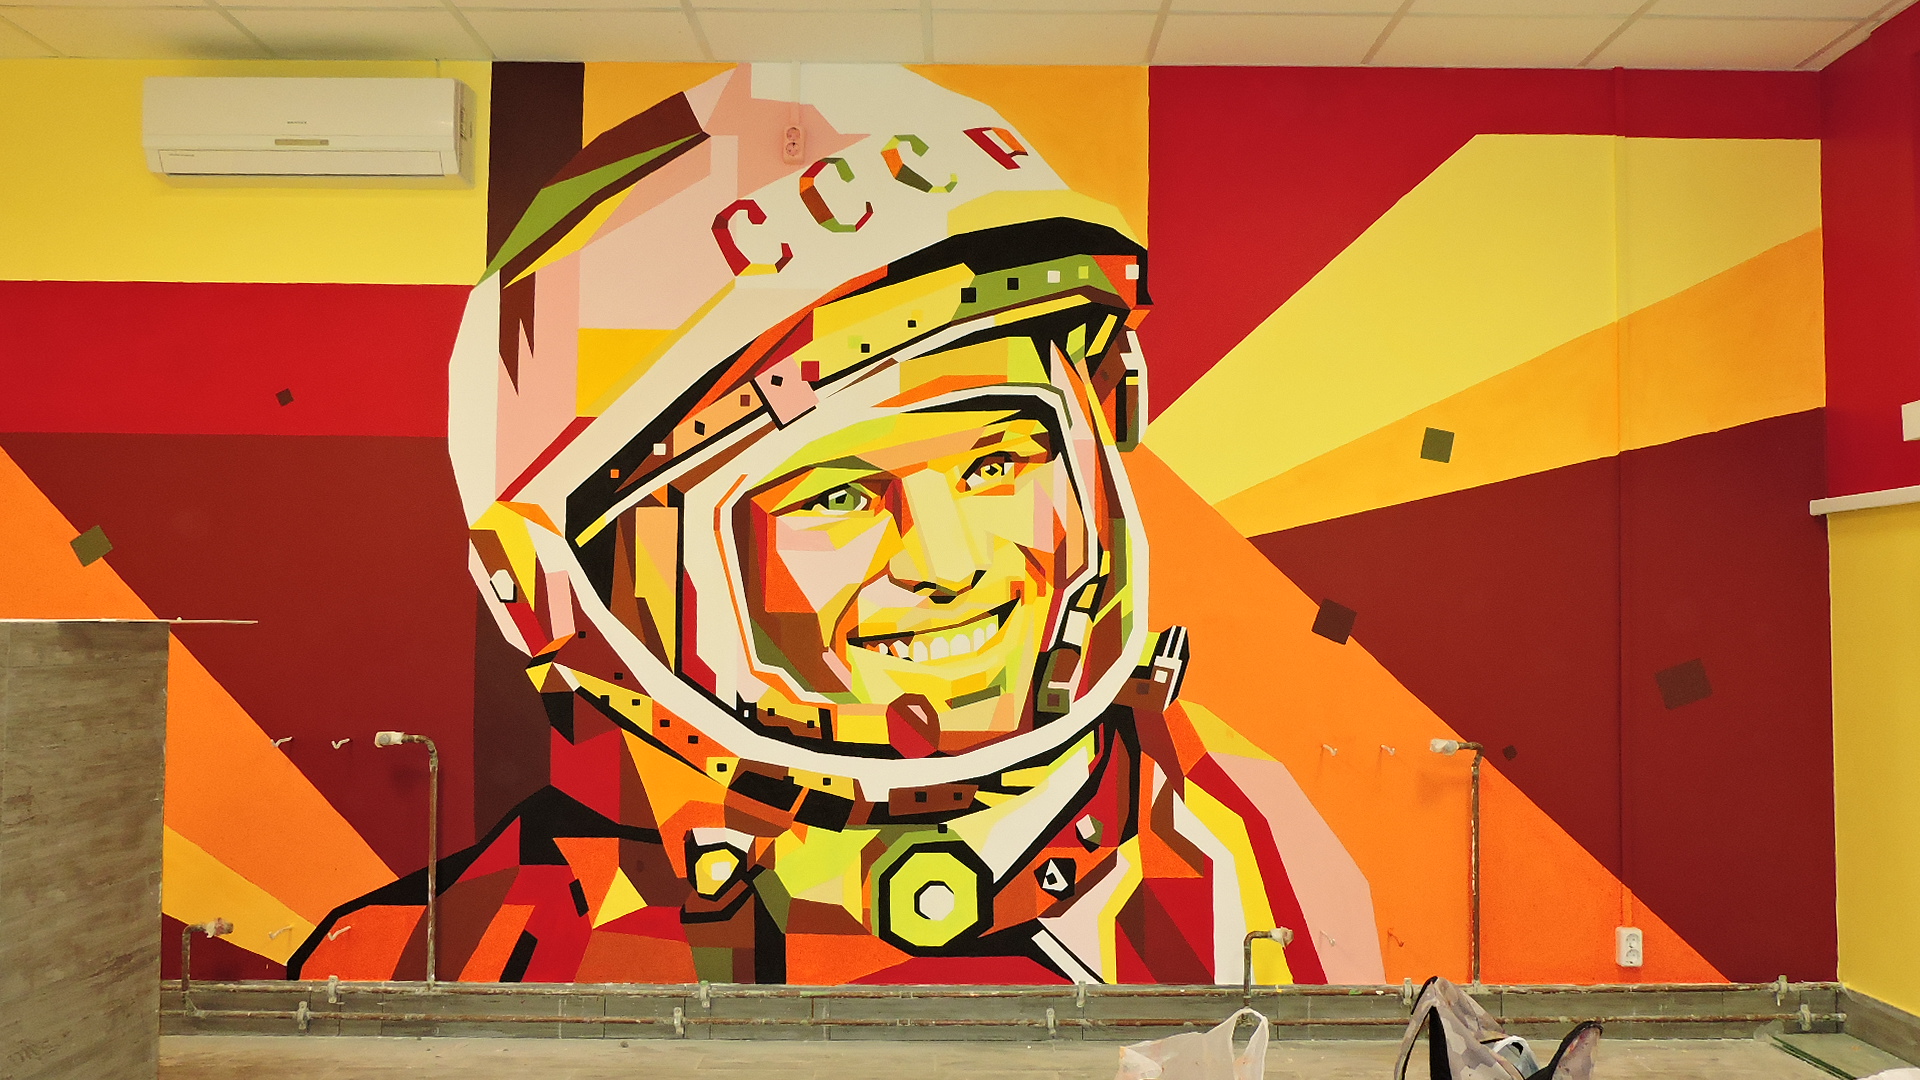 On the wall painted Gagarin's face in a spacesuit